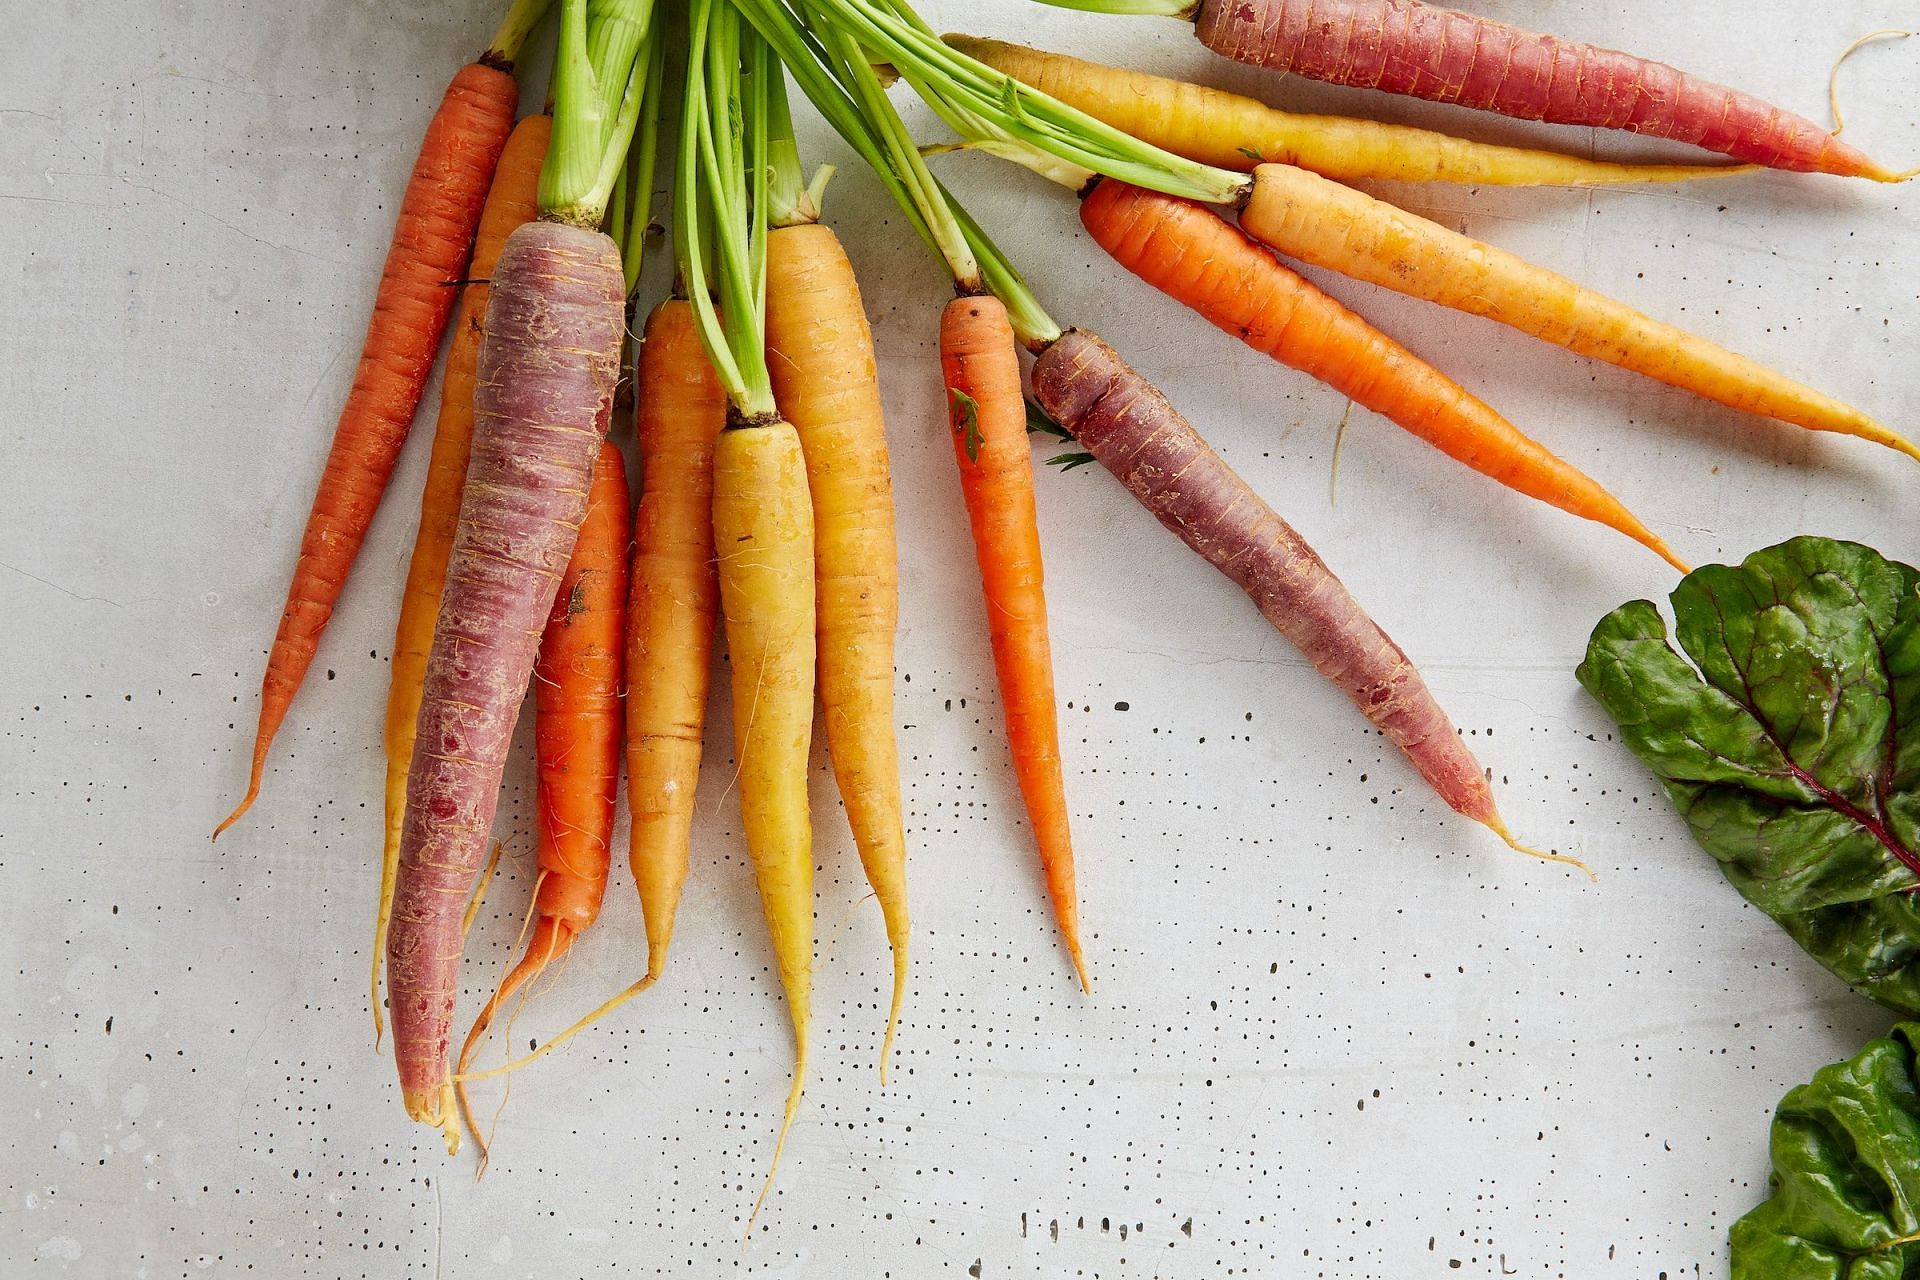 Carrots are among the foods good for the eyes (Image via Unsplash/Gabriel Gurrola)